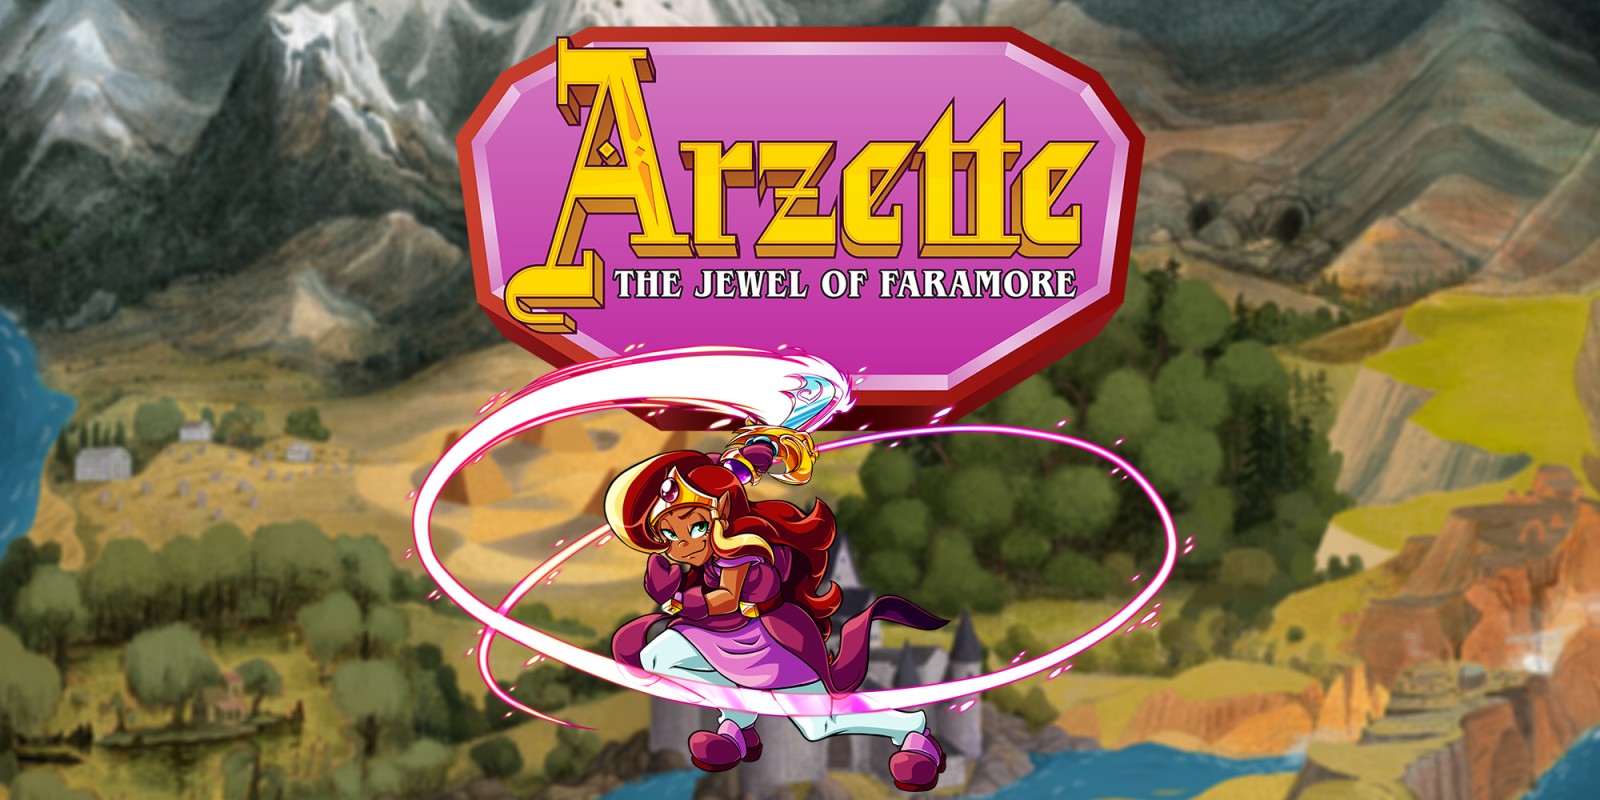 Arzette The Jewel of Faramore Collection Xbox Version Full Game Setup Free Download